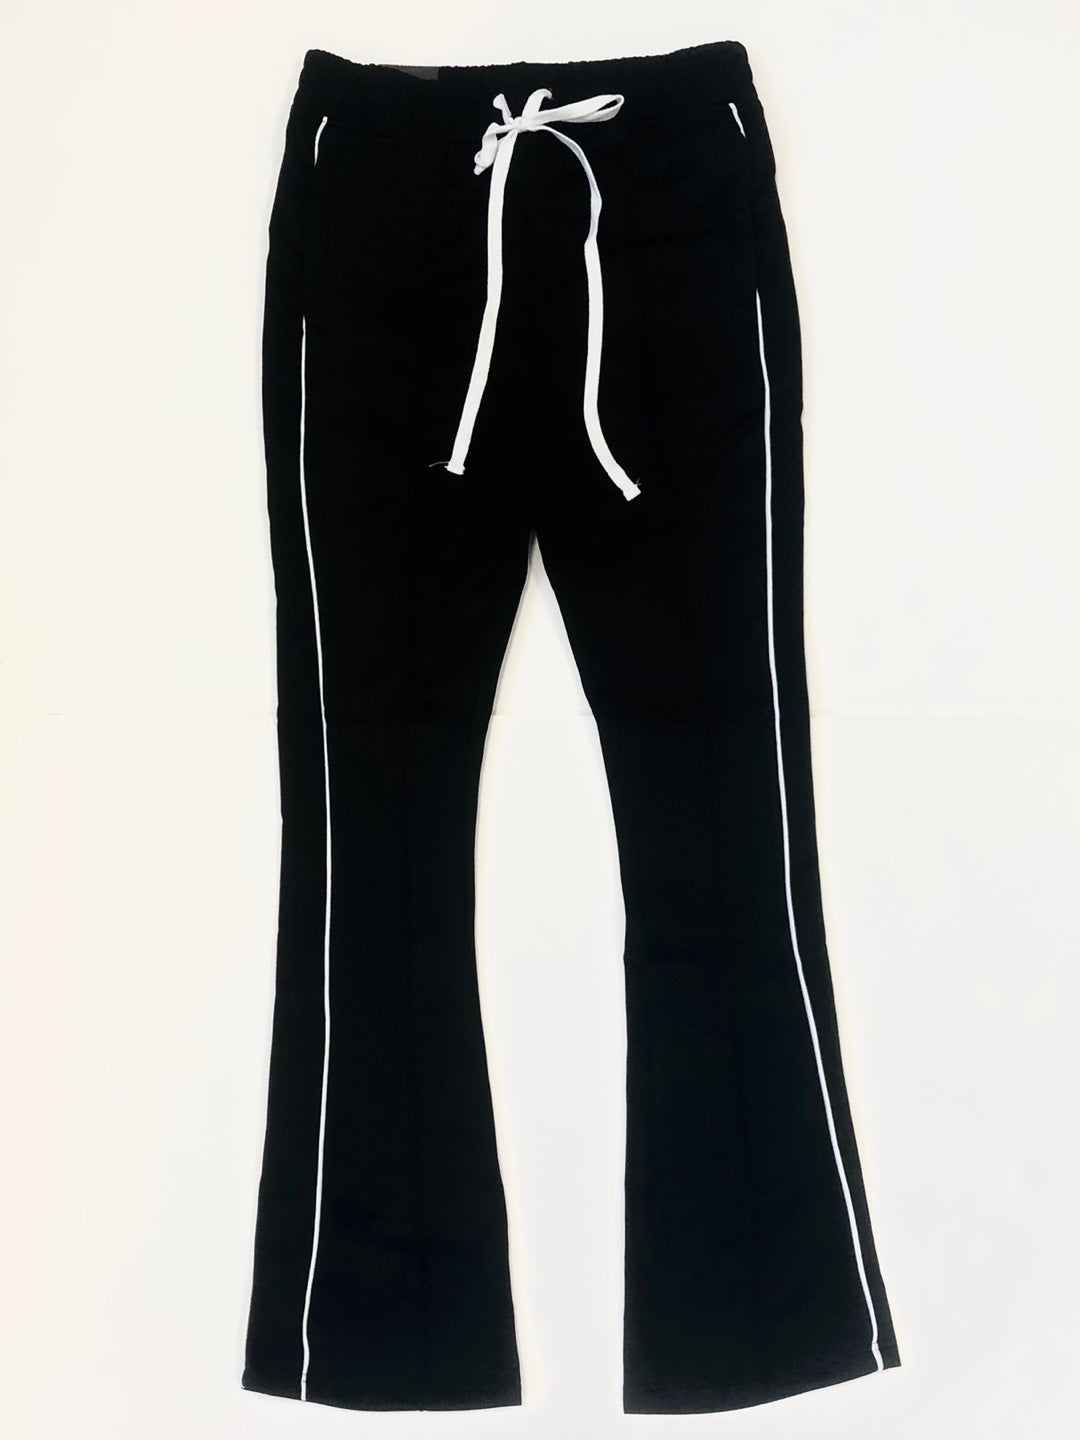 SLIM FLARE TRACK PANTS in red